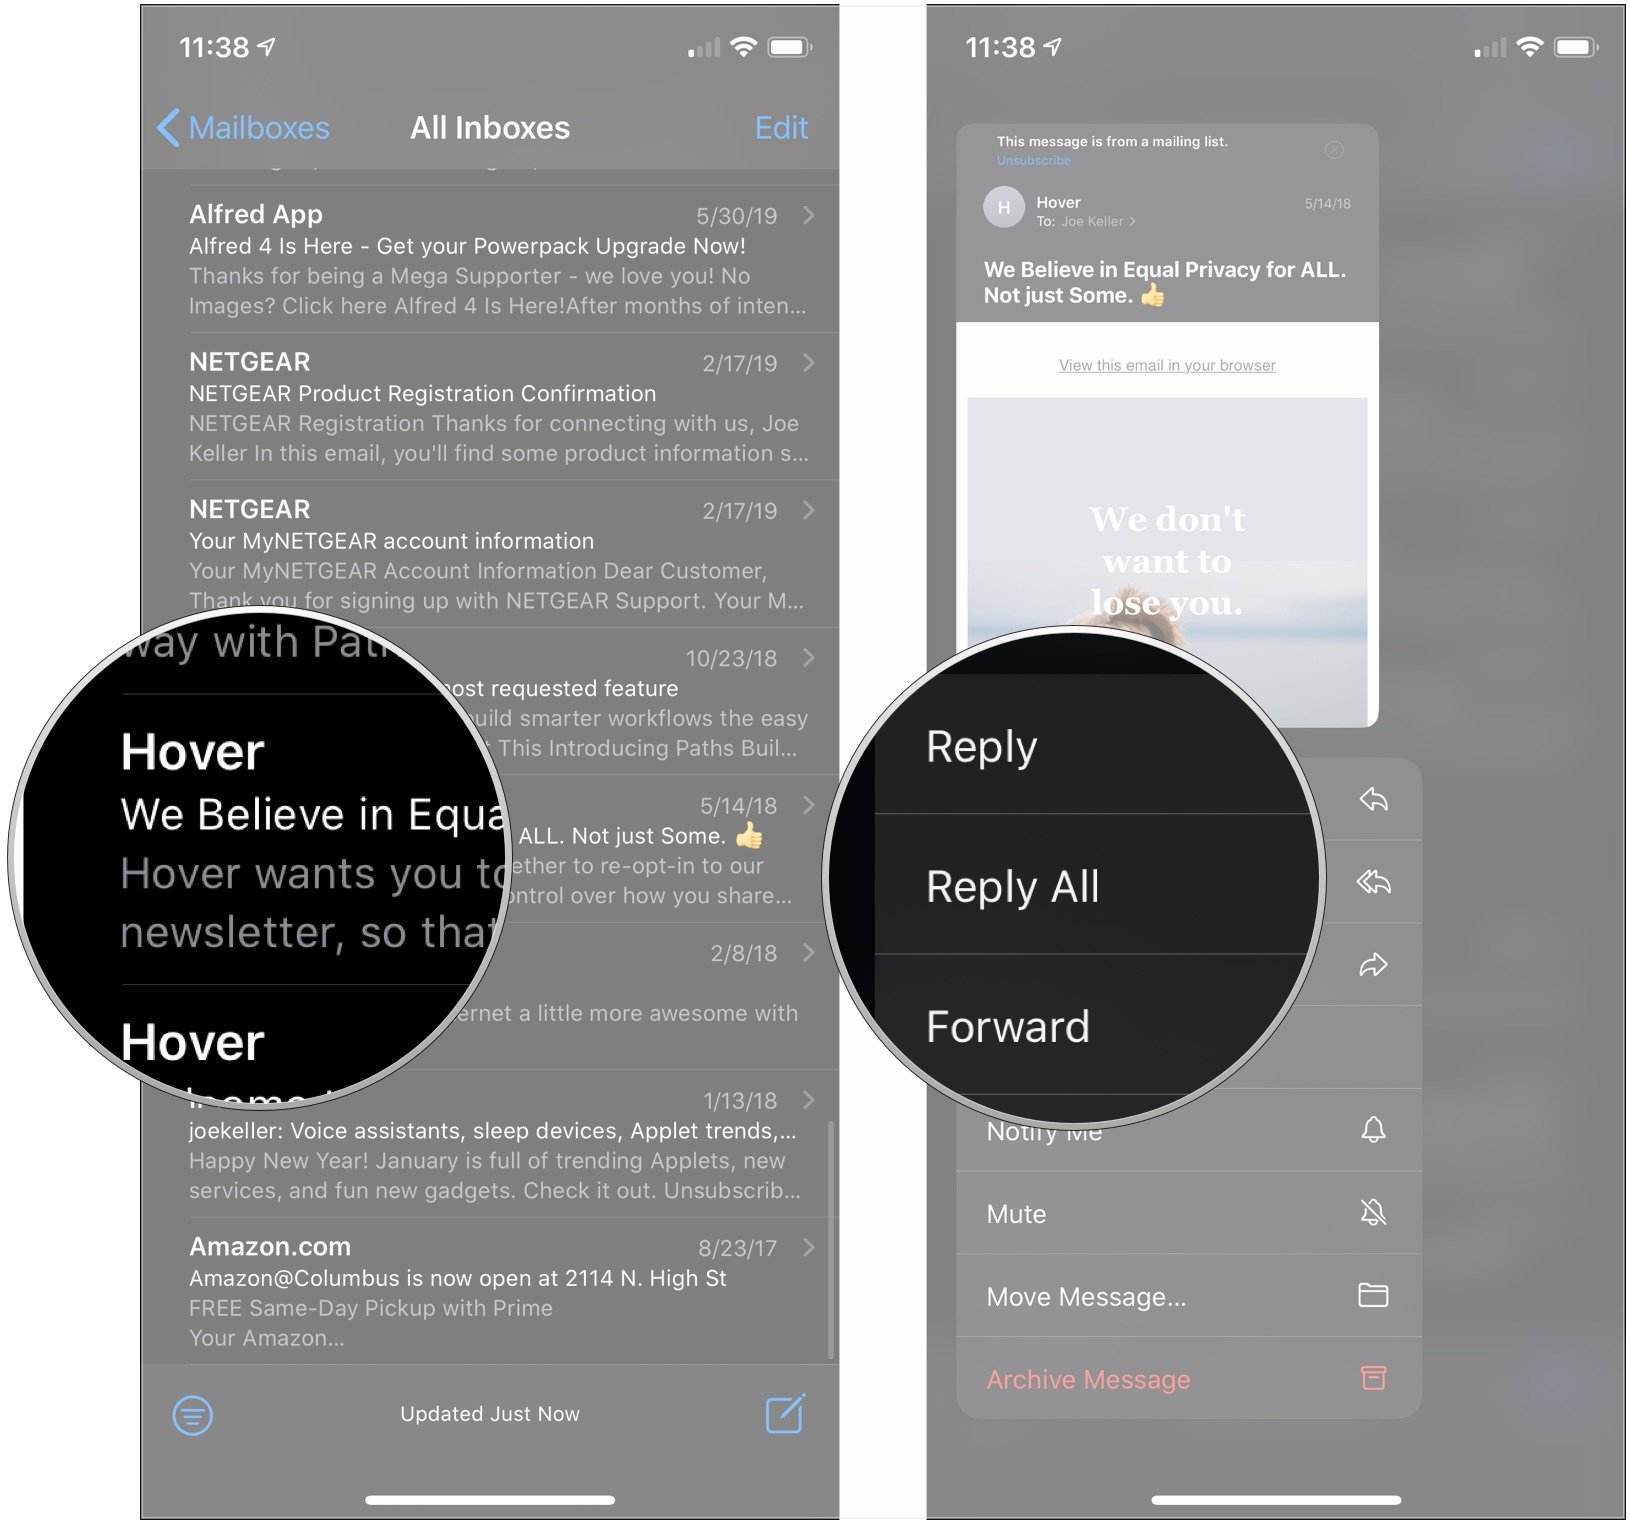 Use Haptic Touch email actions, showing how to long-press email, then tap an action